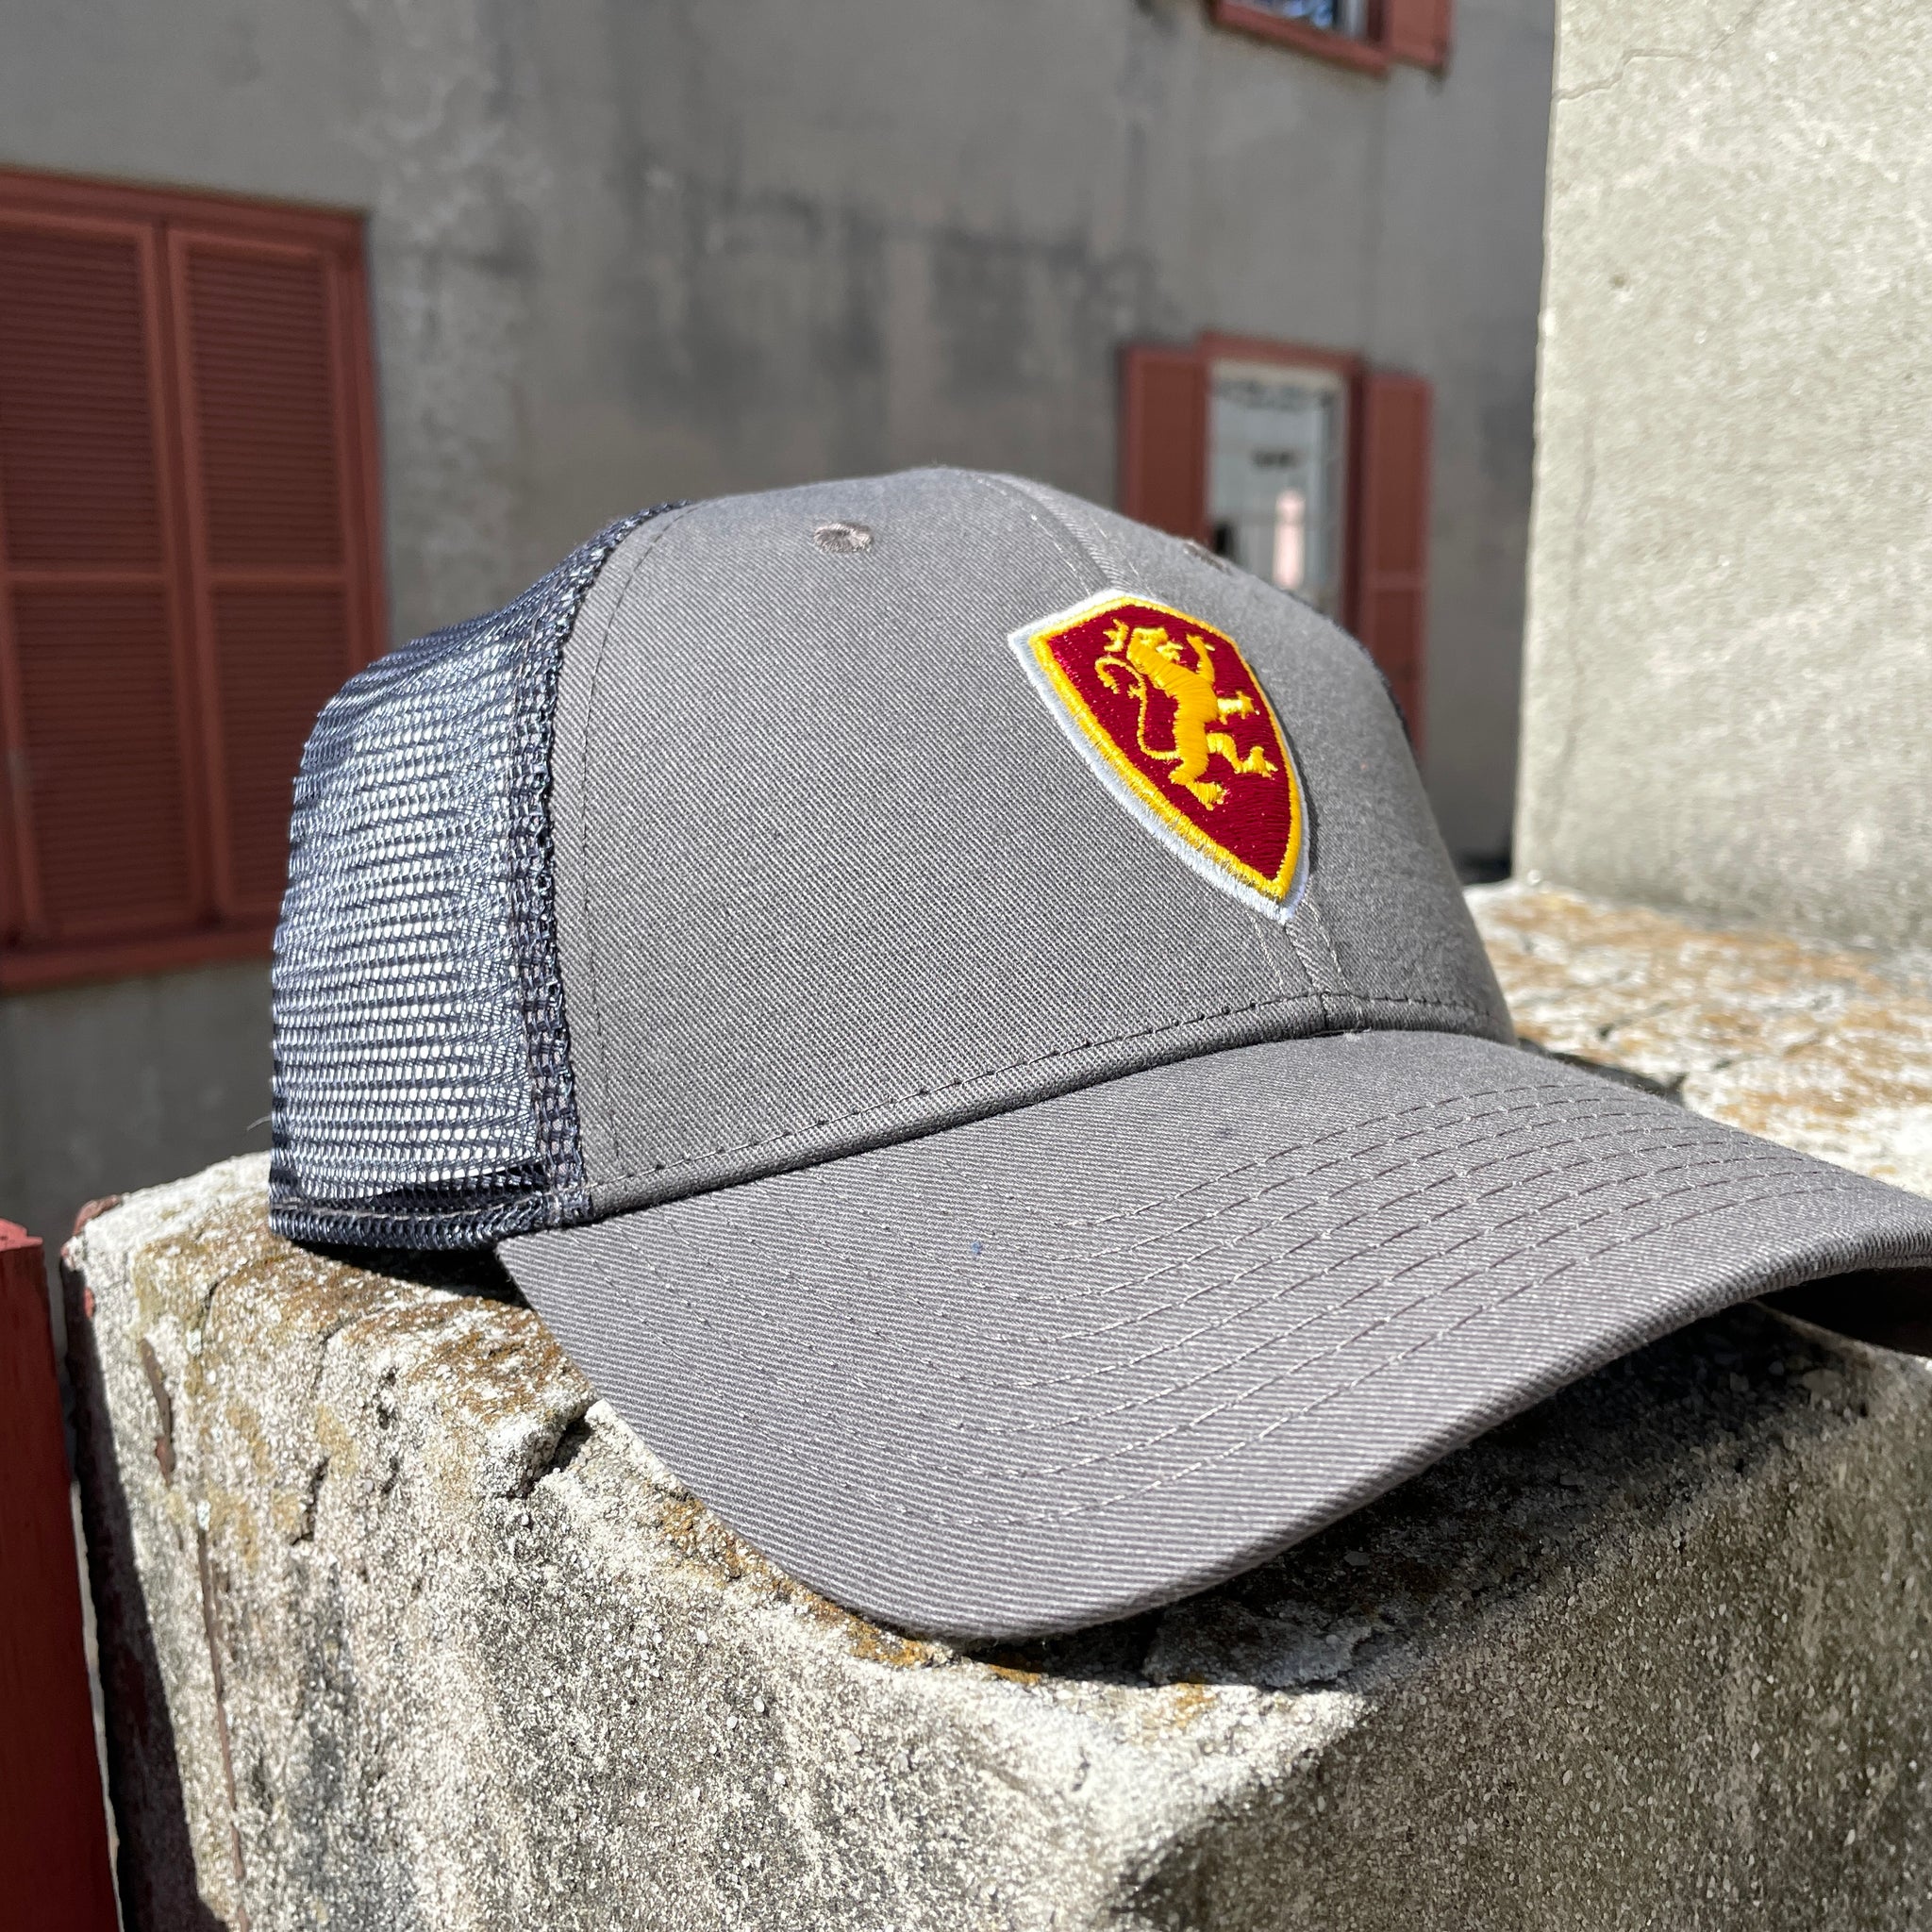 Grey hat with mesh back with Flagler shield logo in middle